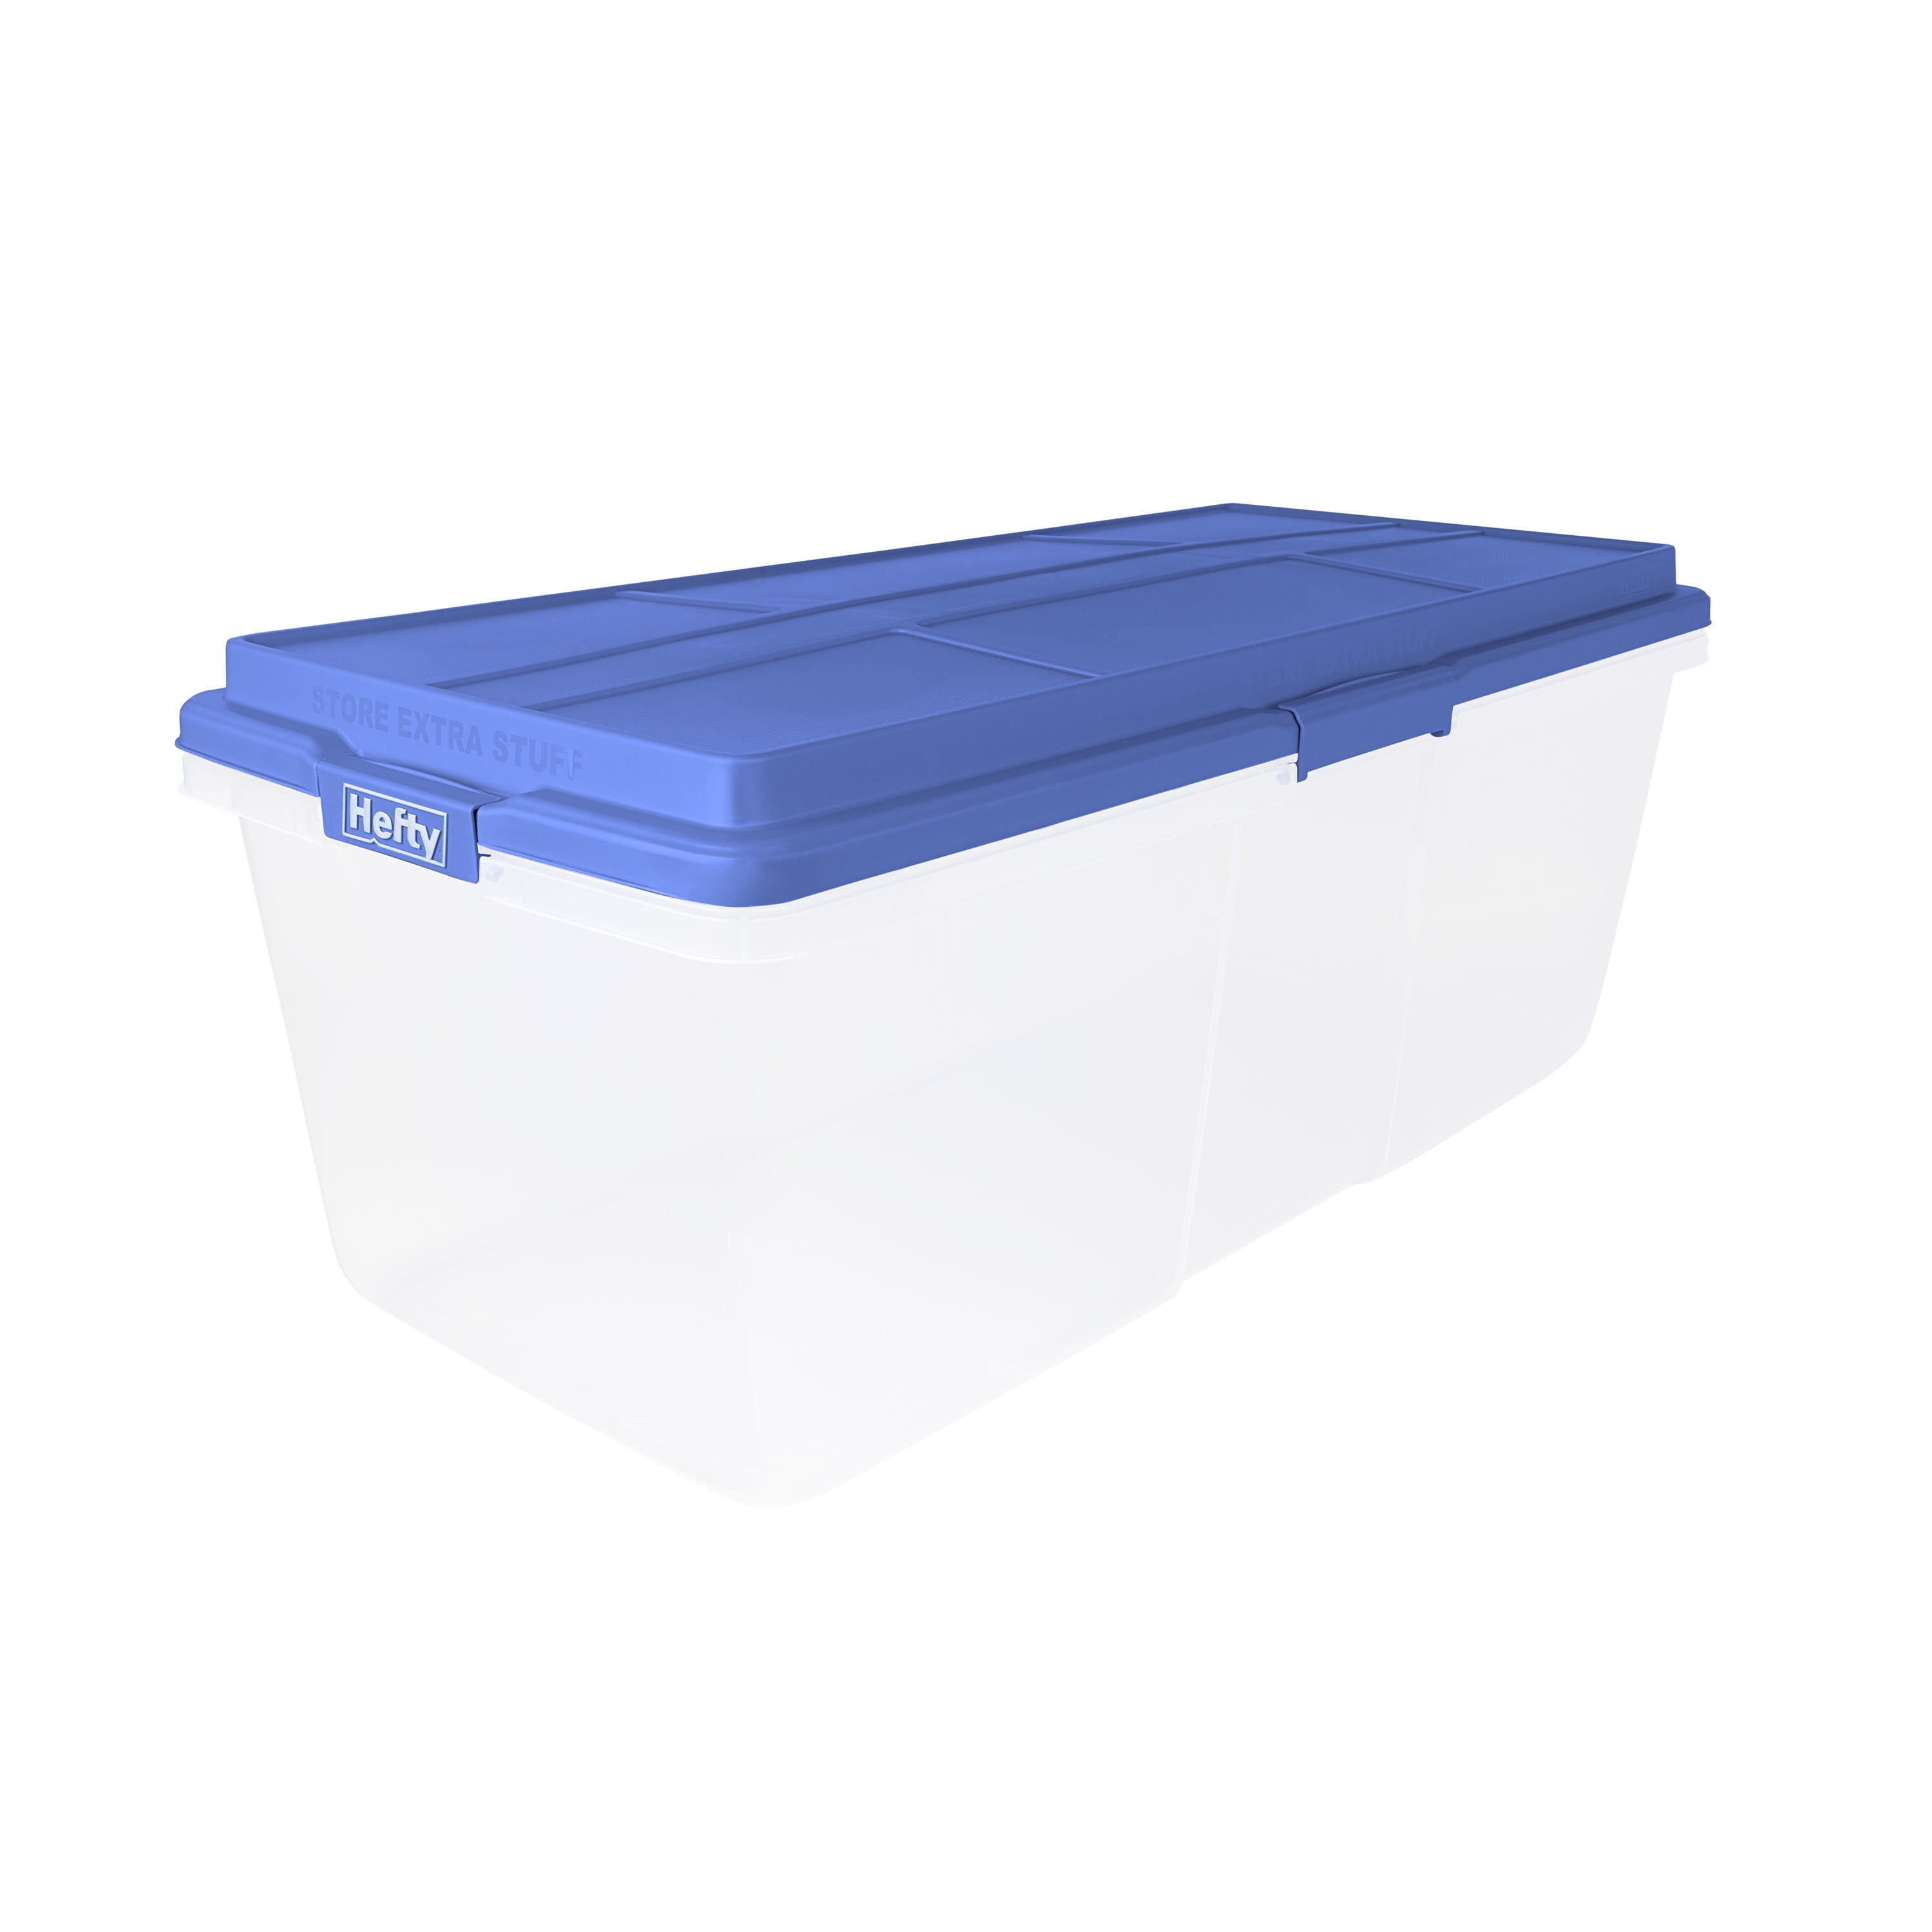 Blue Plastic Box w/Handle and Dividers for Toy Tool & Storage. Lego Jewelry 